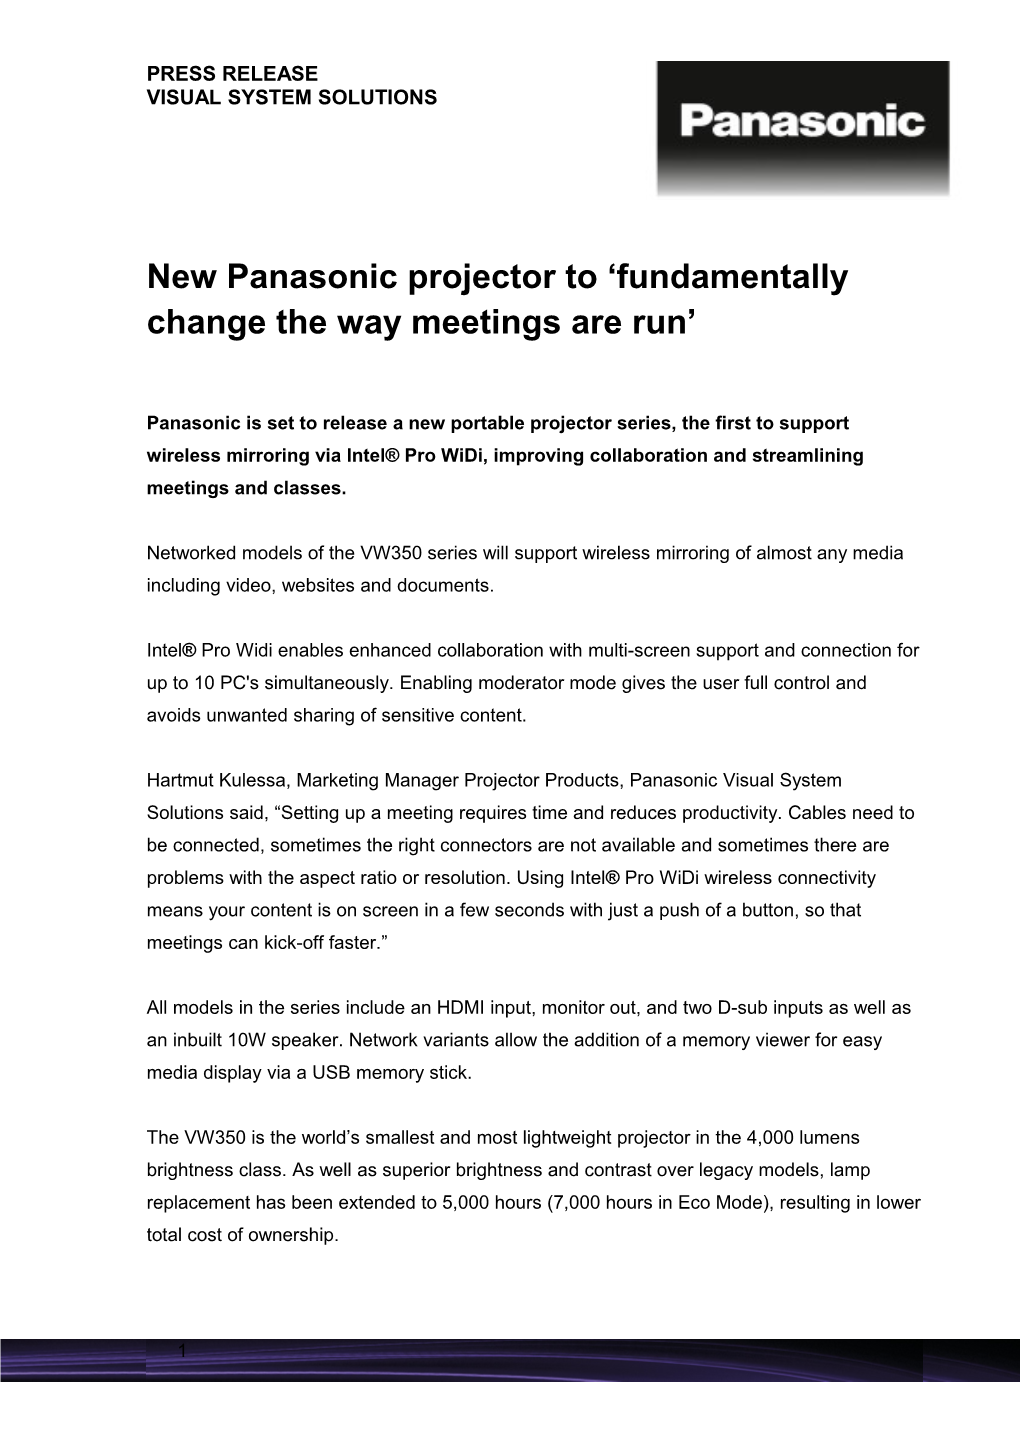 New Panasonic Projector to Fundamentally Change the Way Meetings Are Run